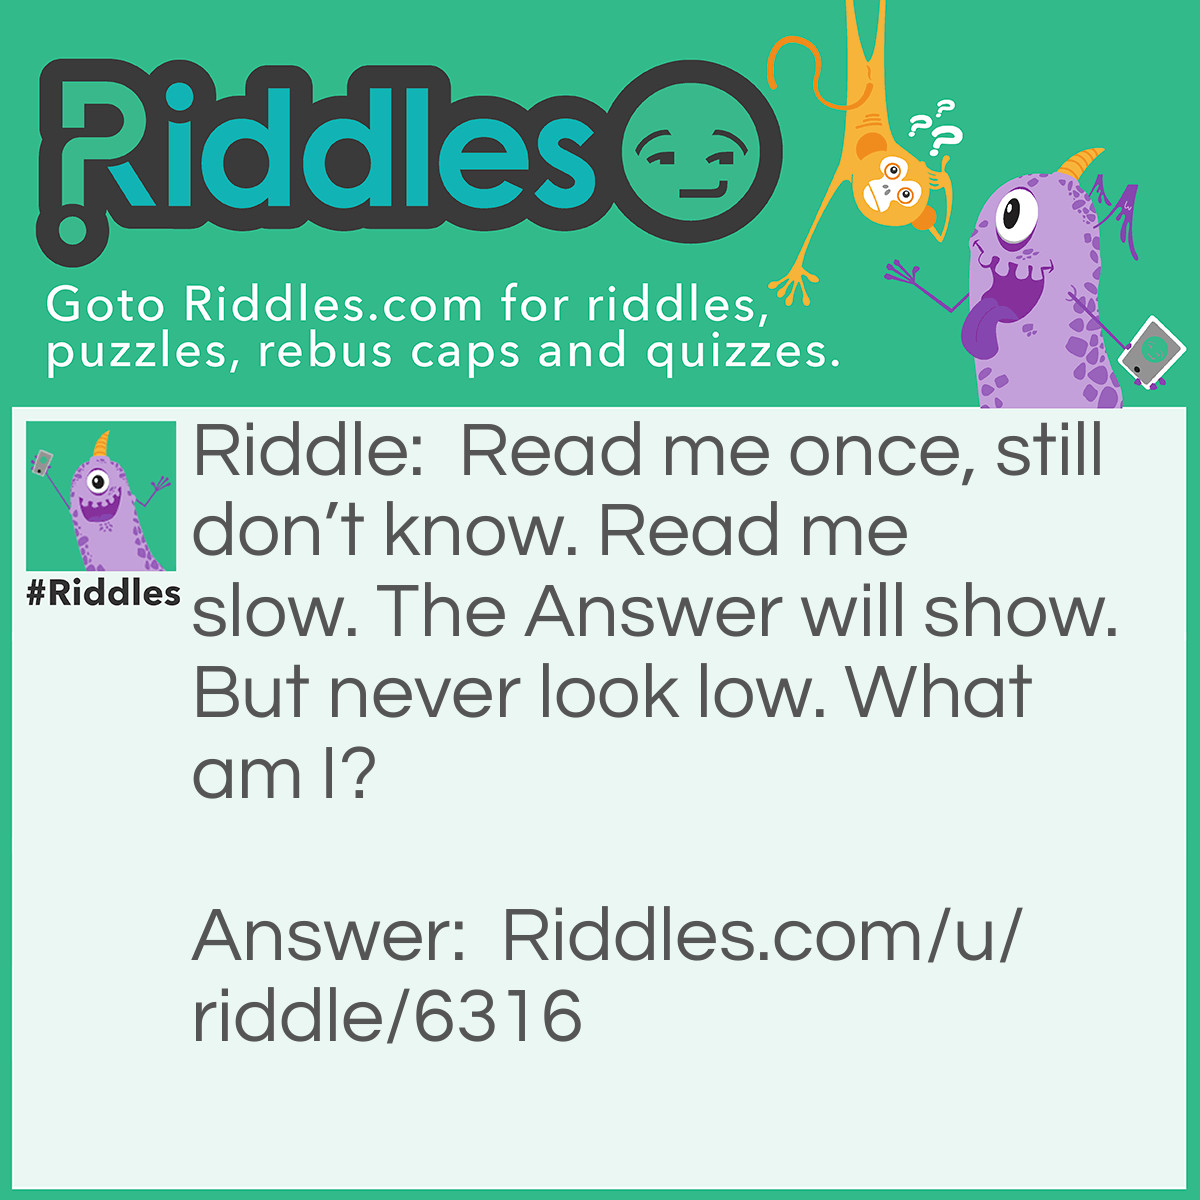 Riddle: Read me once, still don't know. Read me slow. The Answer will show. But never look low. What am I? Answer: A Riddle! It said don’t look low because the answer is on top! (The Title).